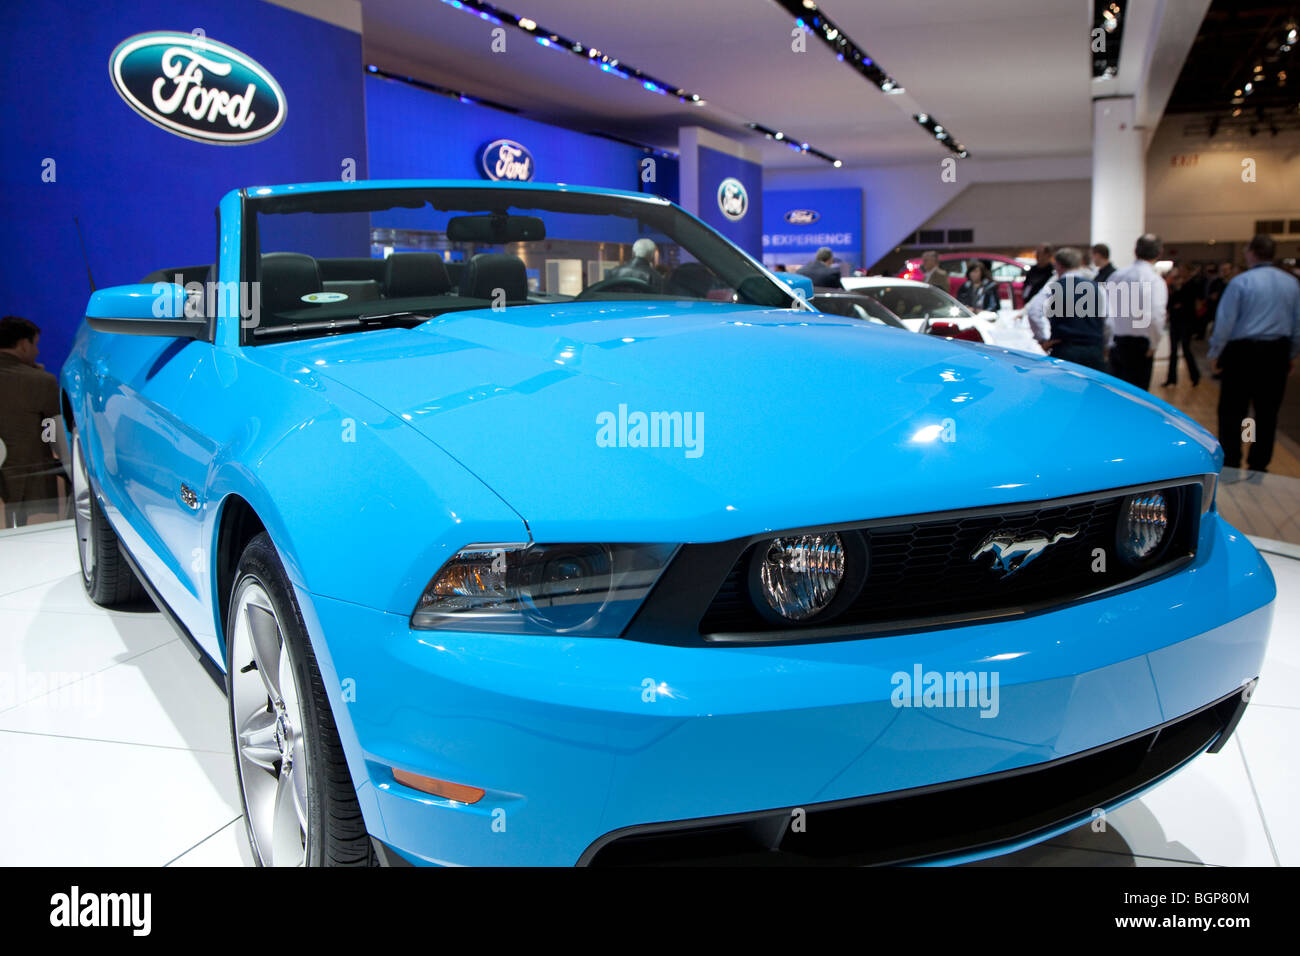 Detroit, Michigan - The 2011 Ford Mustang GT on display at the 2010 North American International Auto Show. Stock Photo